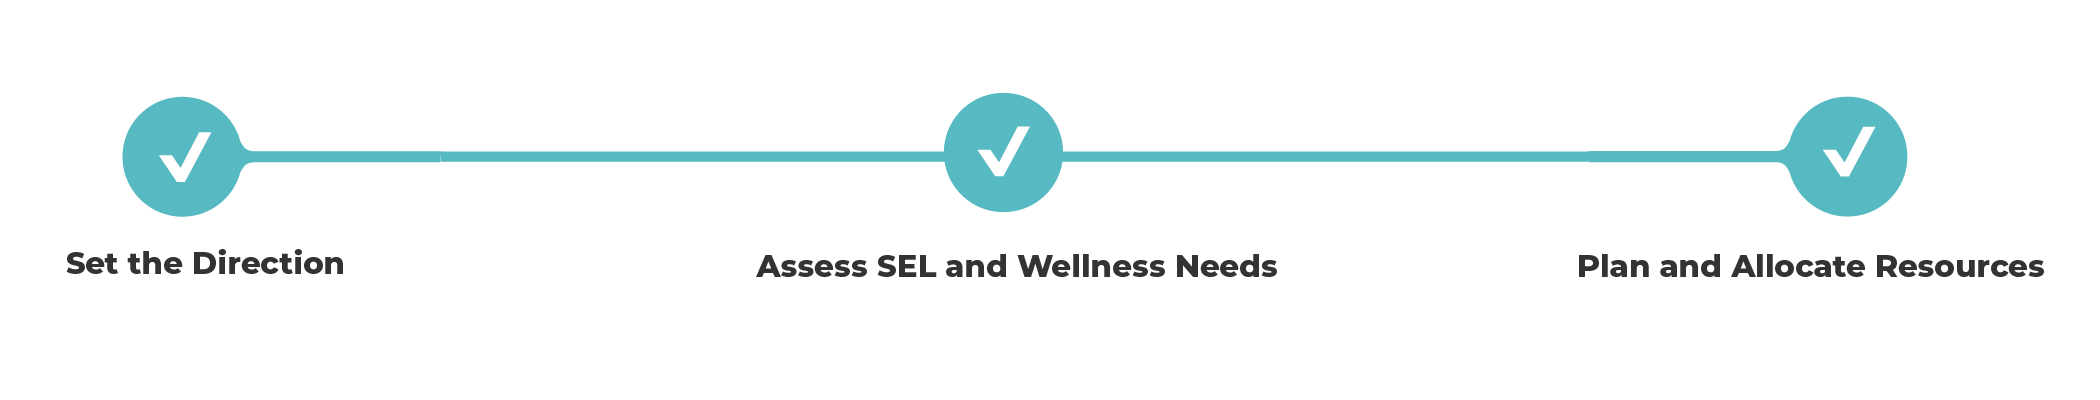 100% completed progress bar with three steps: set the direction., assess SEL and wellness needs, plan and allocate resources. 